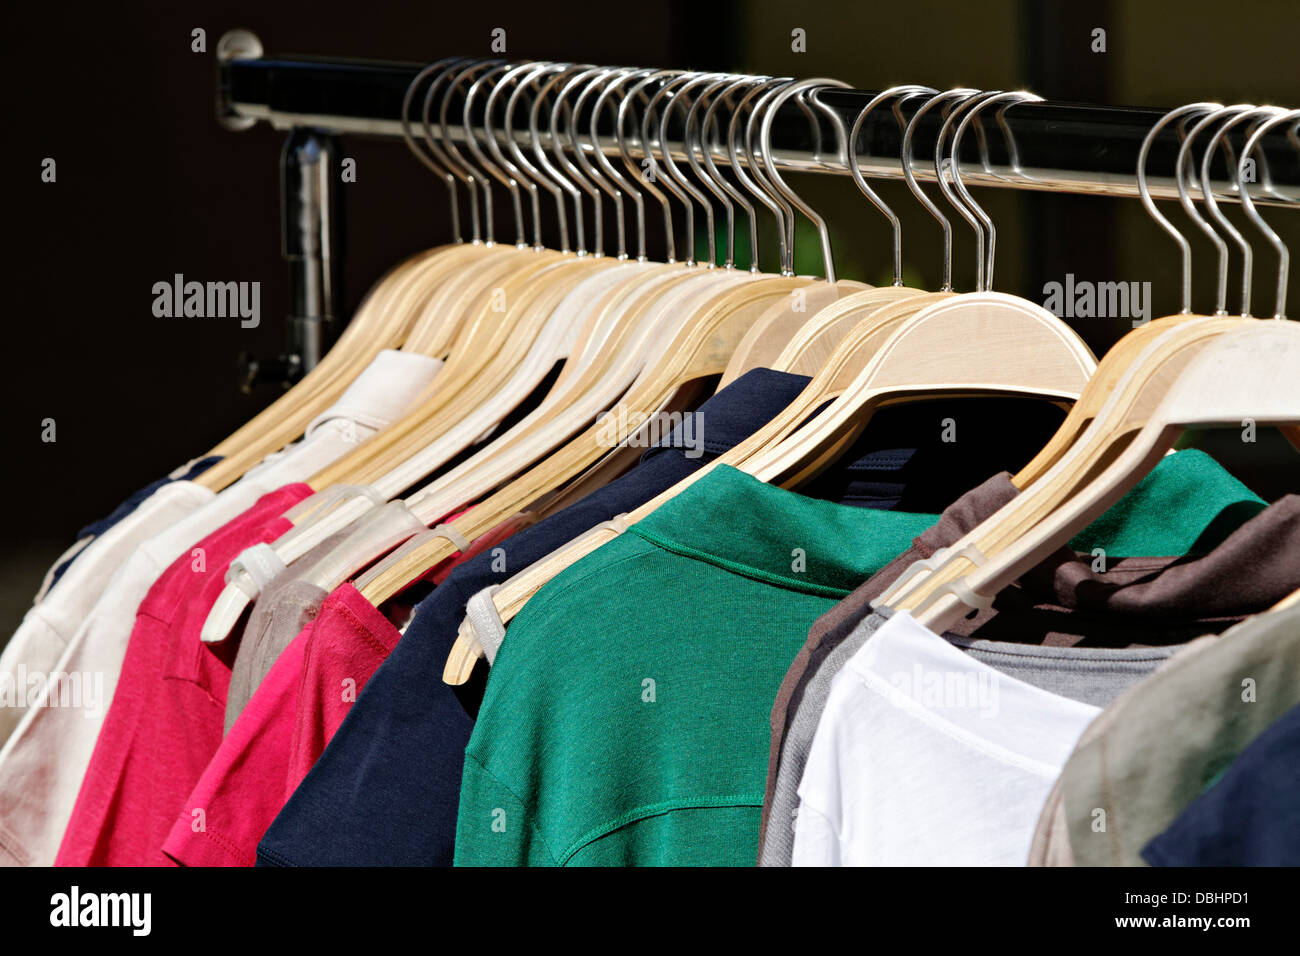 Clothing Hanging On Clothes Rack Stock Photo Alamy